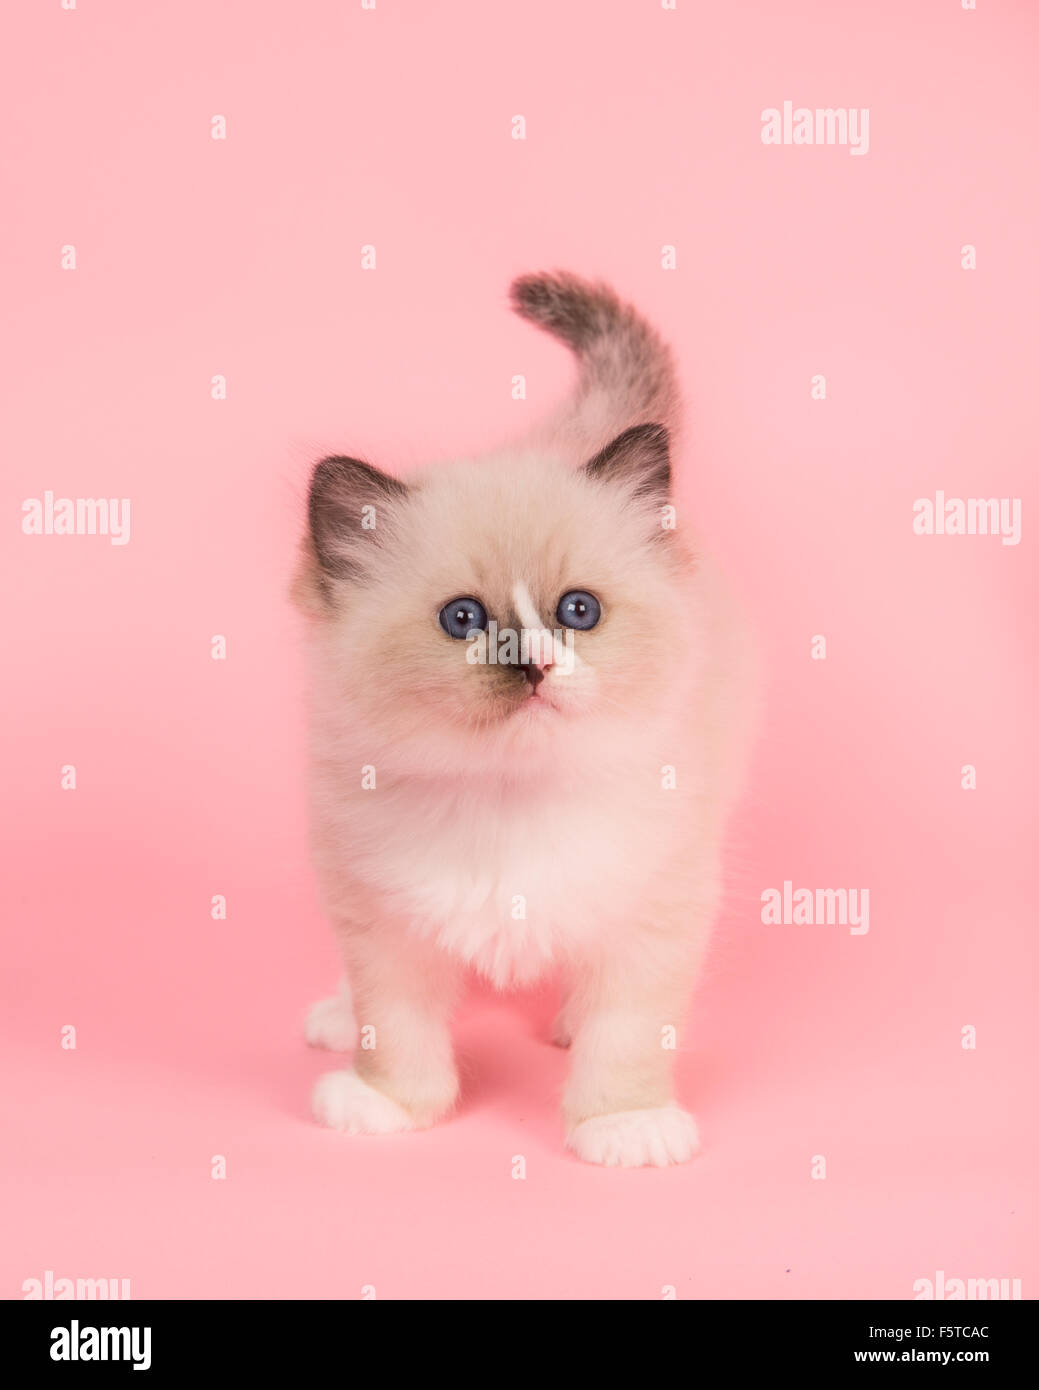 Cute standing ragdoll kitten with blue eyes on a pink background Stock Photo